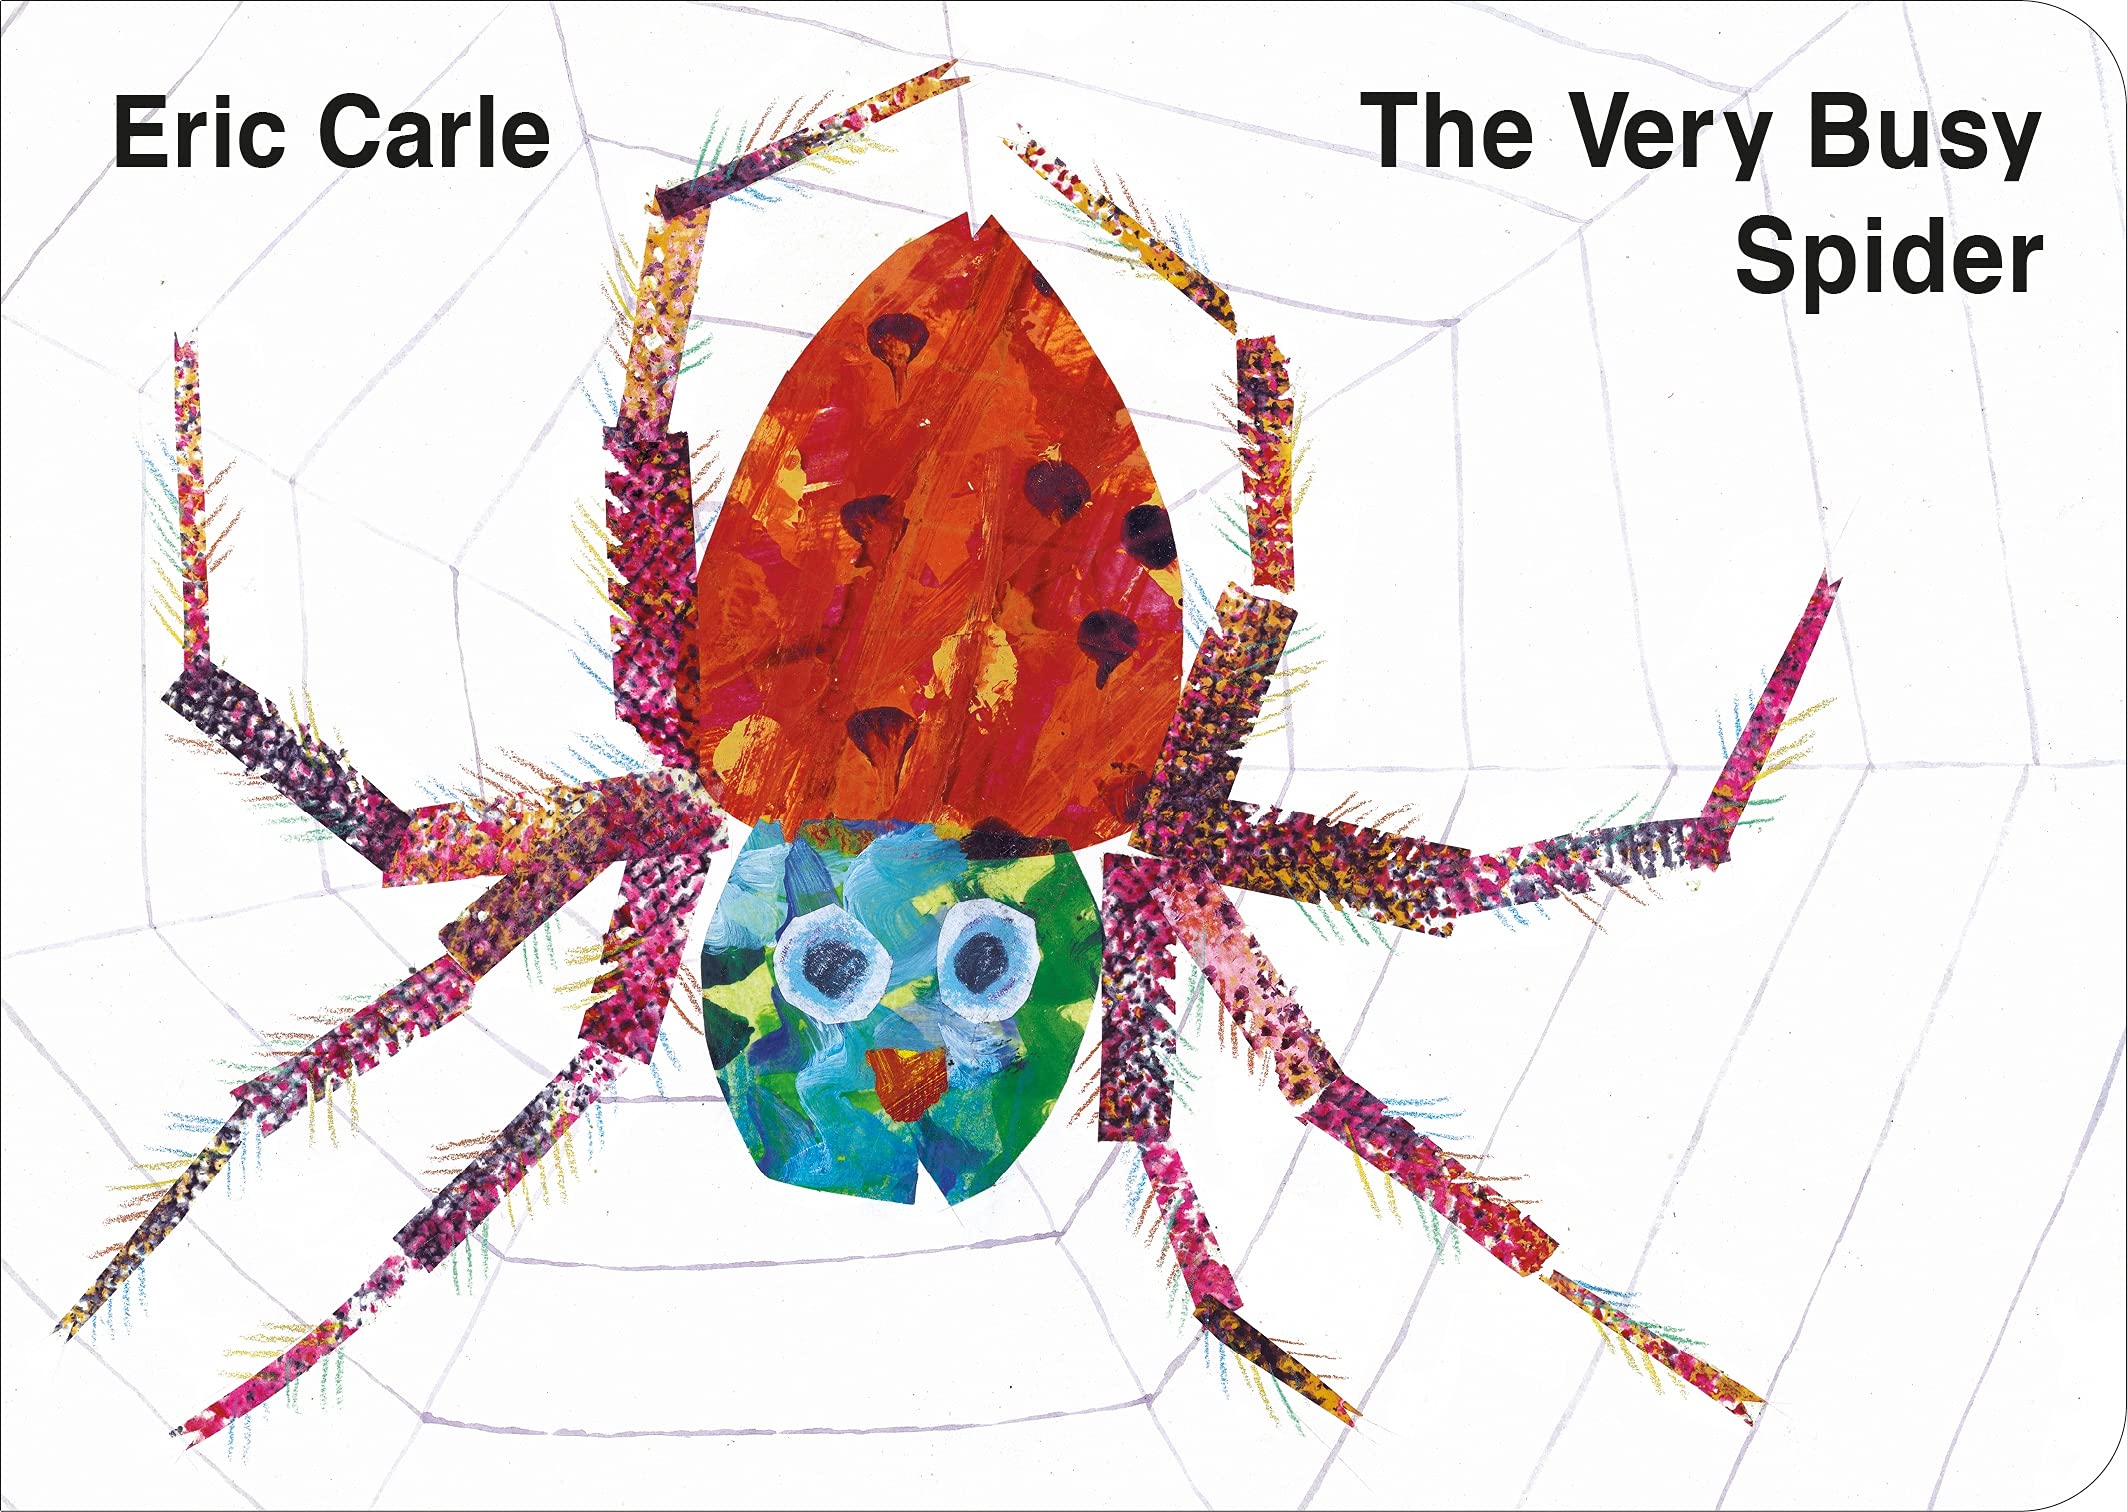 IMG : The very busy Spider